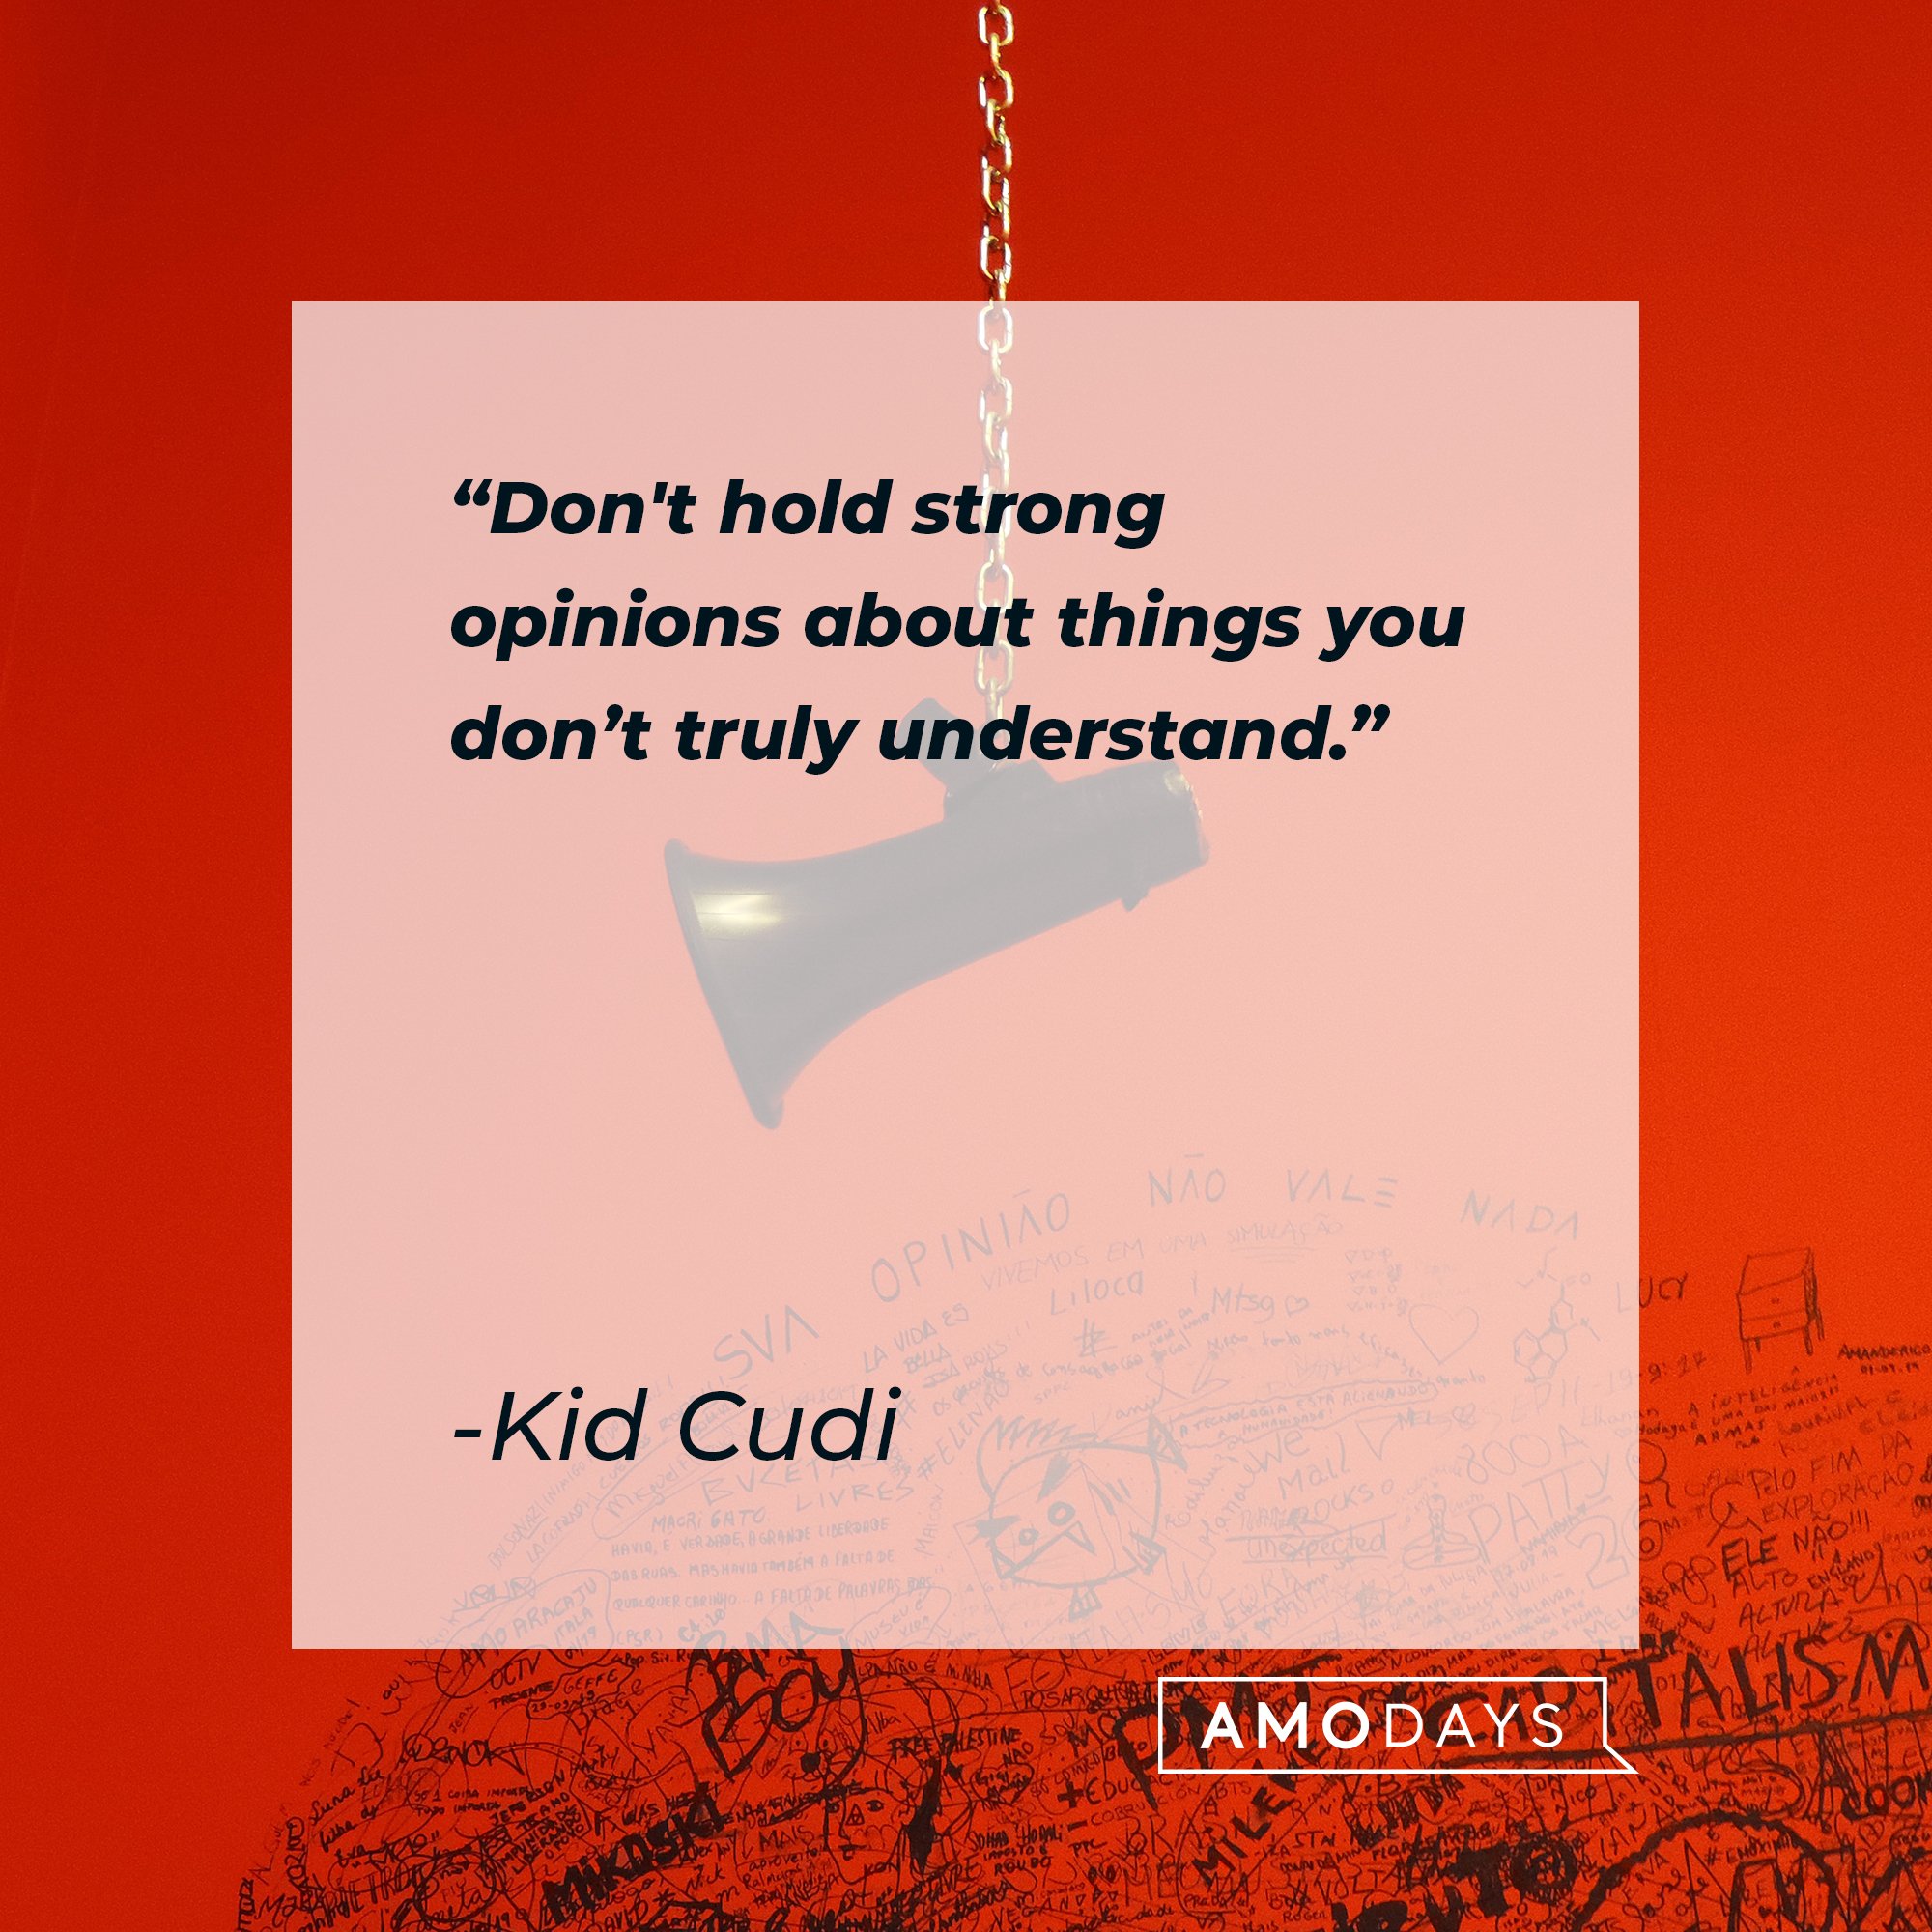 Kid Cudi’s quote: “Don't hold strong opinions about things you don’t truly understand.” | Image: AmoDays 